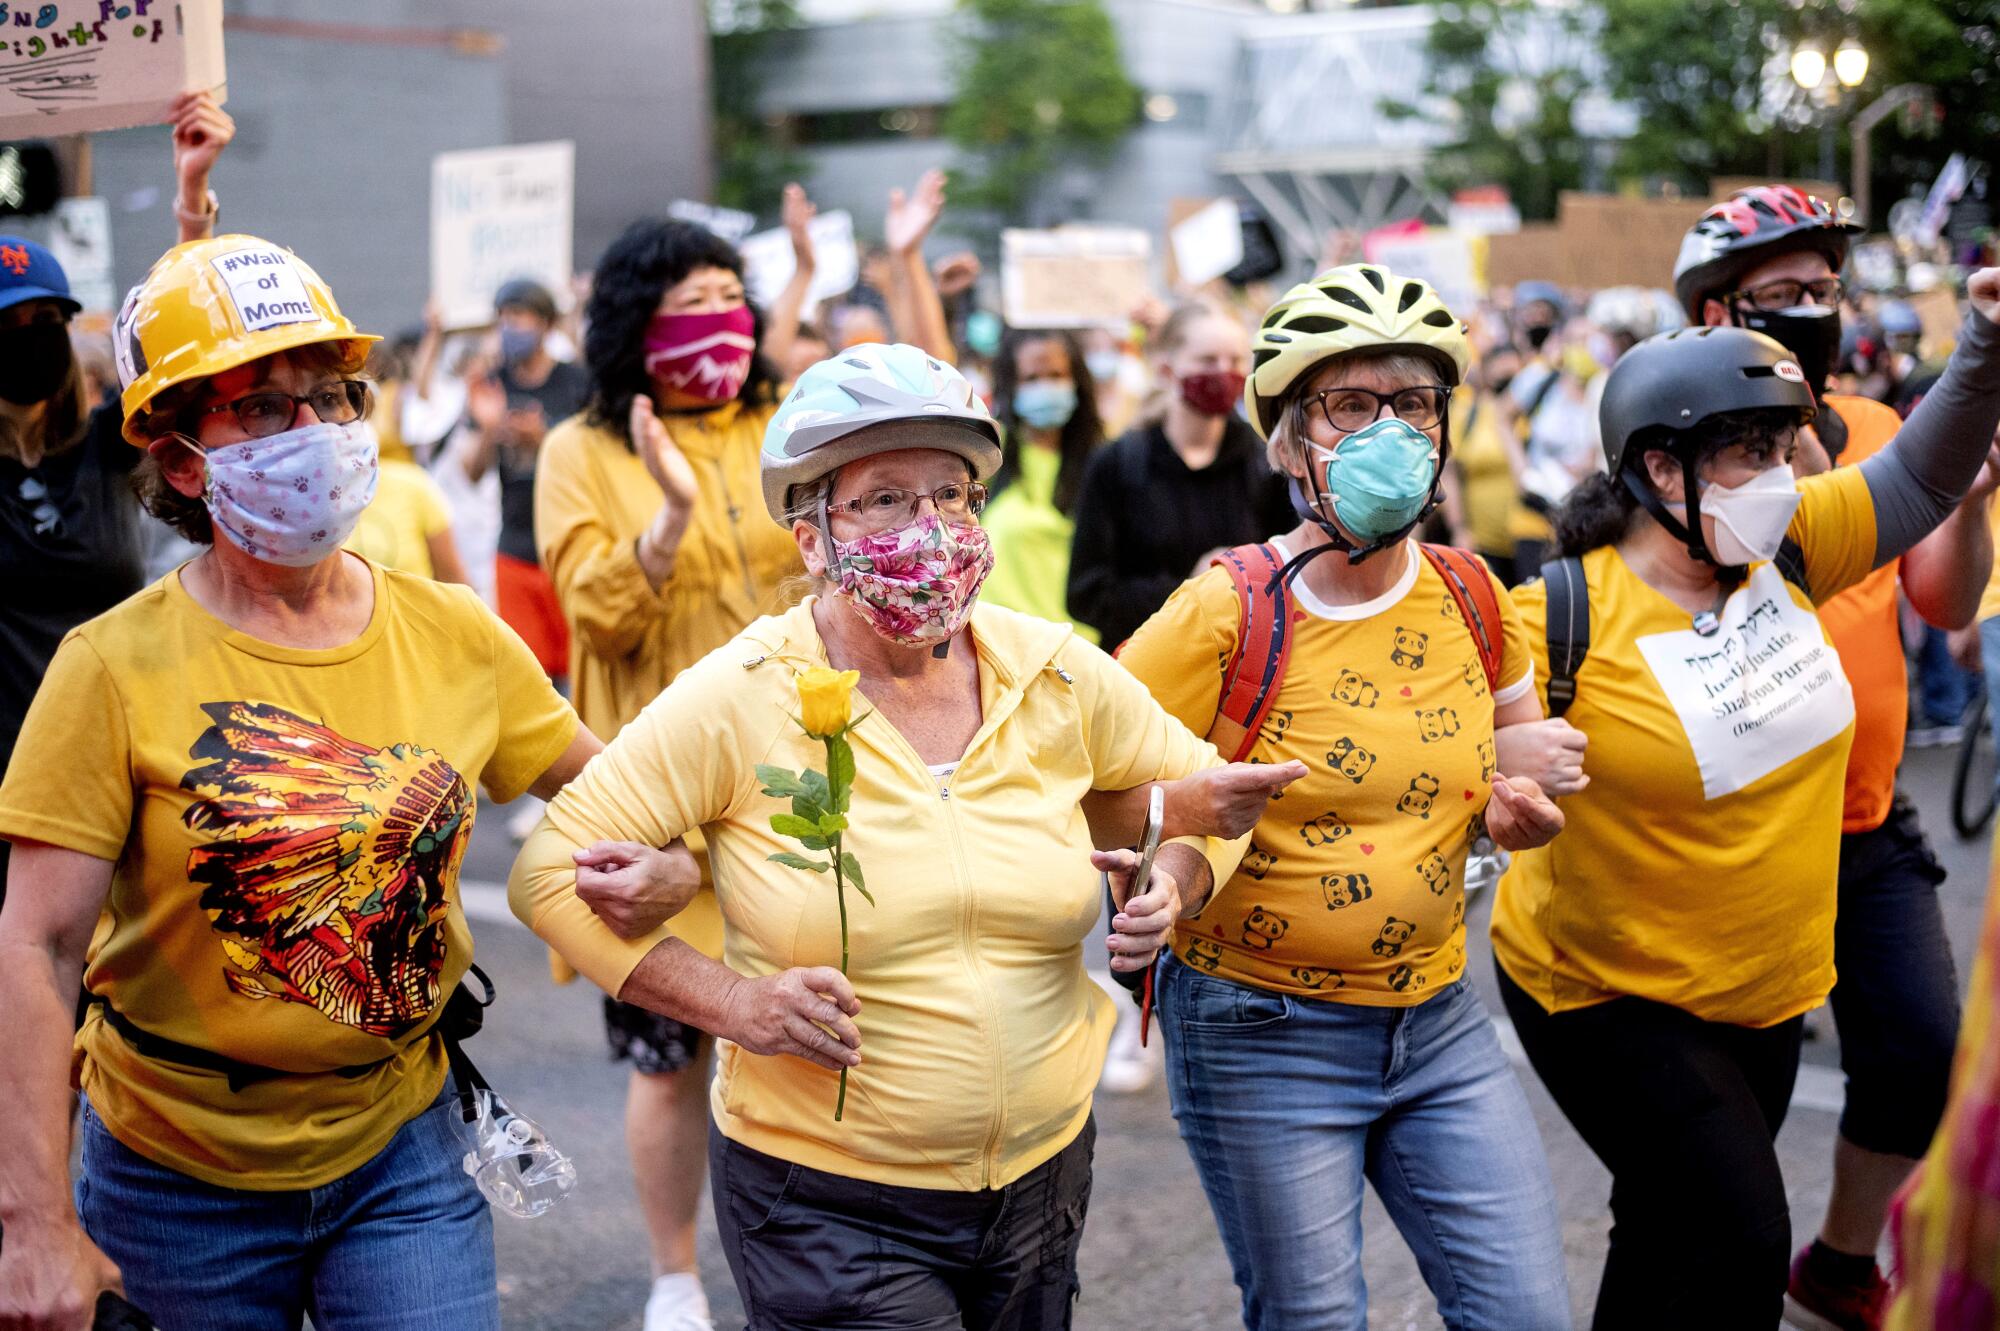 Norma Lewis holds a flower while forming a "Wall of Moms" during a Black Lives Matter protest in Portland, Ore.